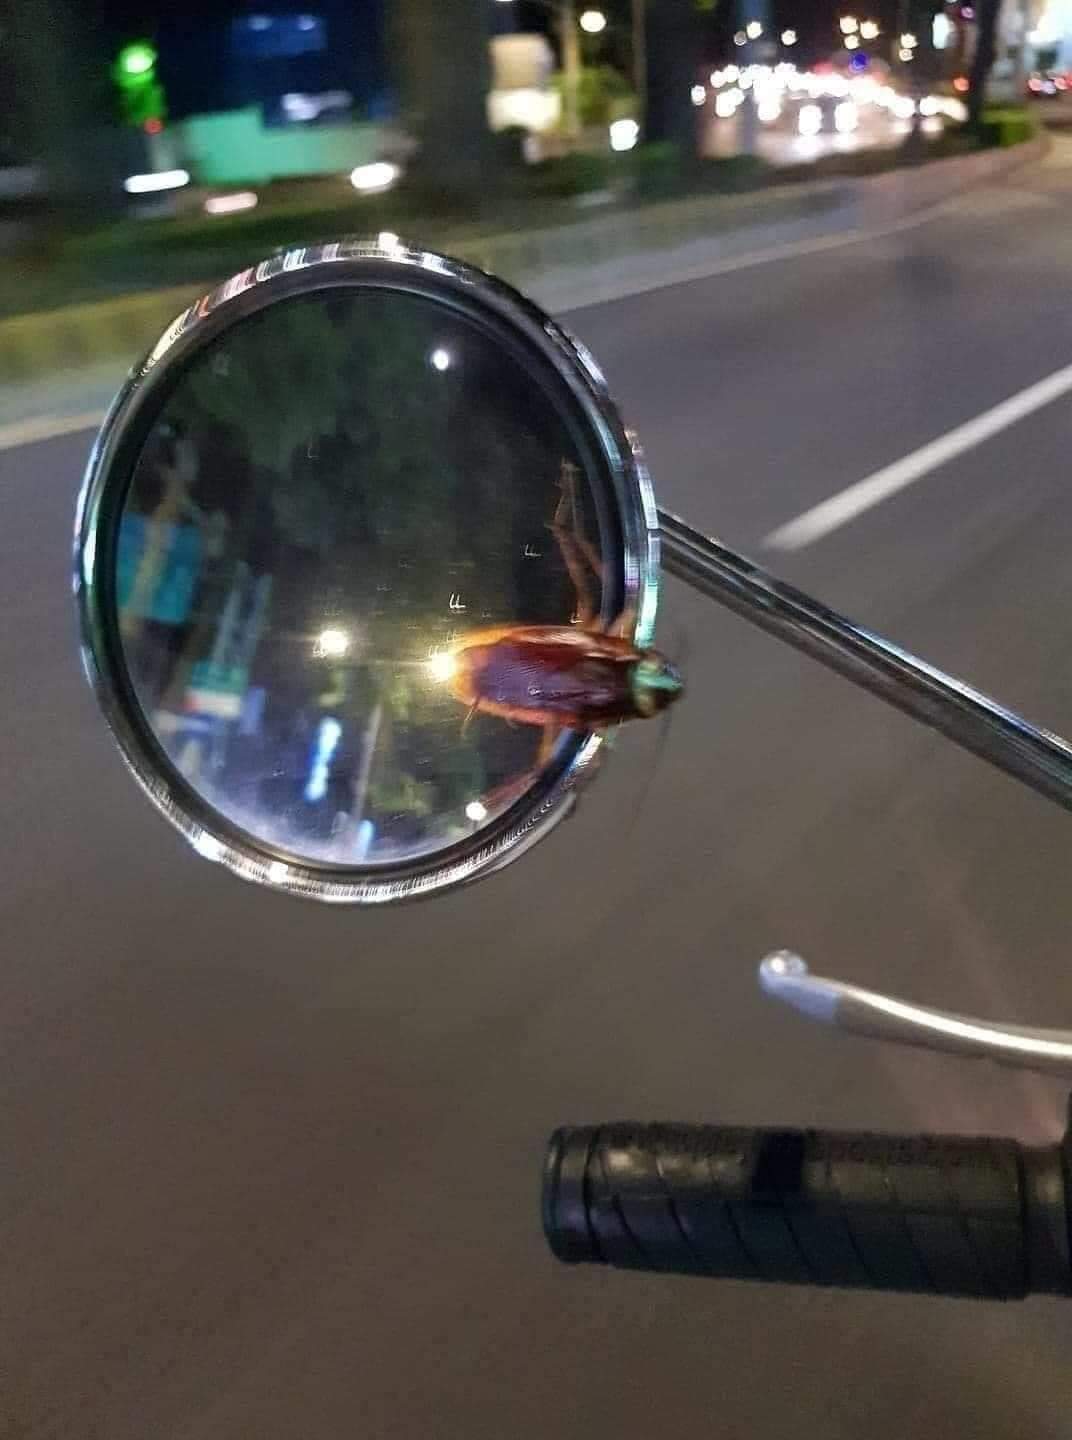 cockroach on motorcycle's mirror